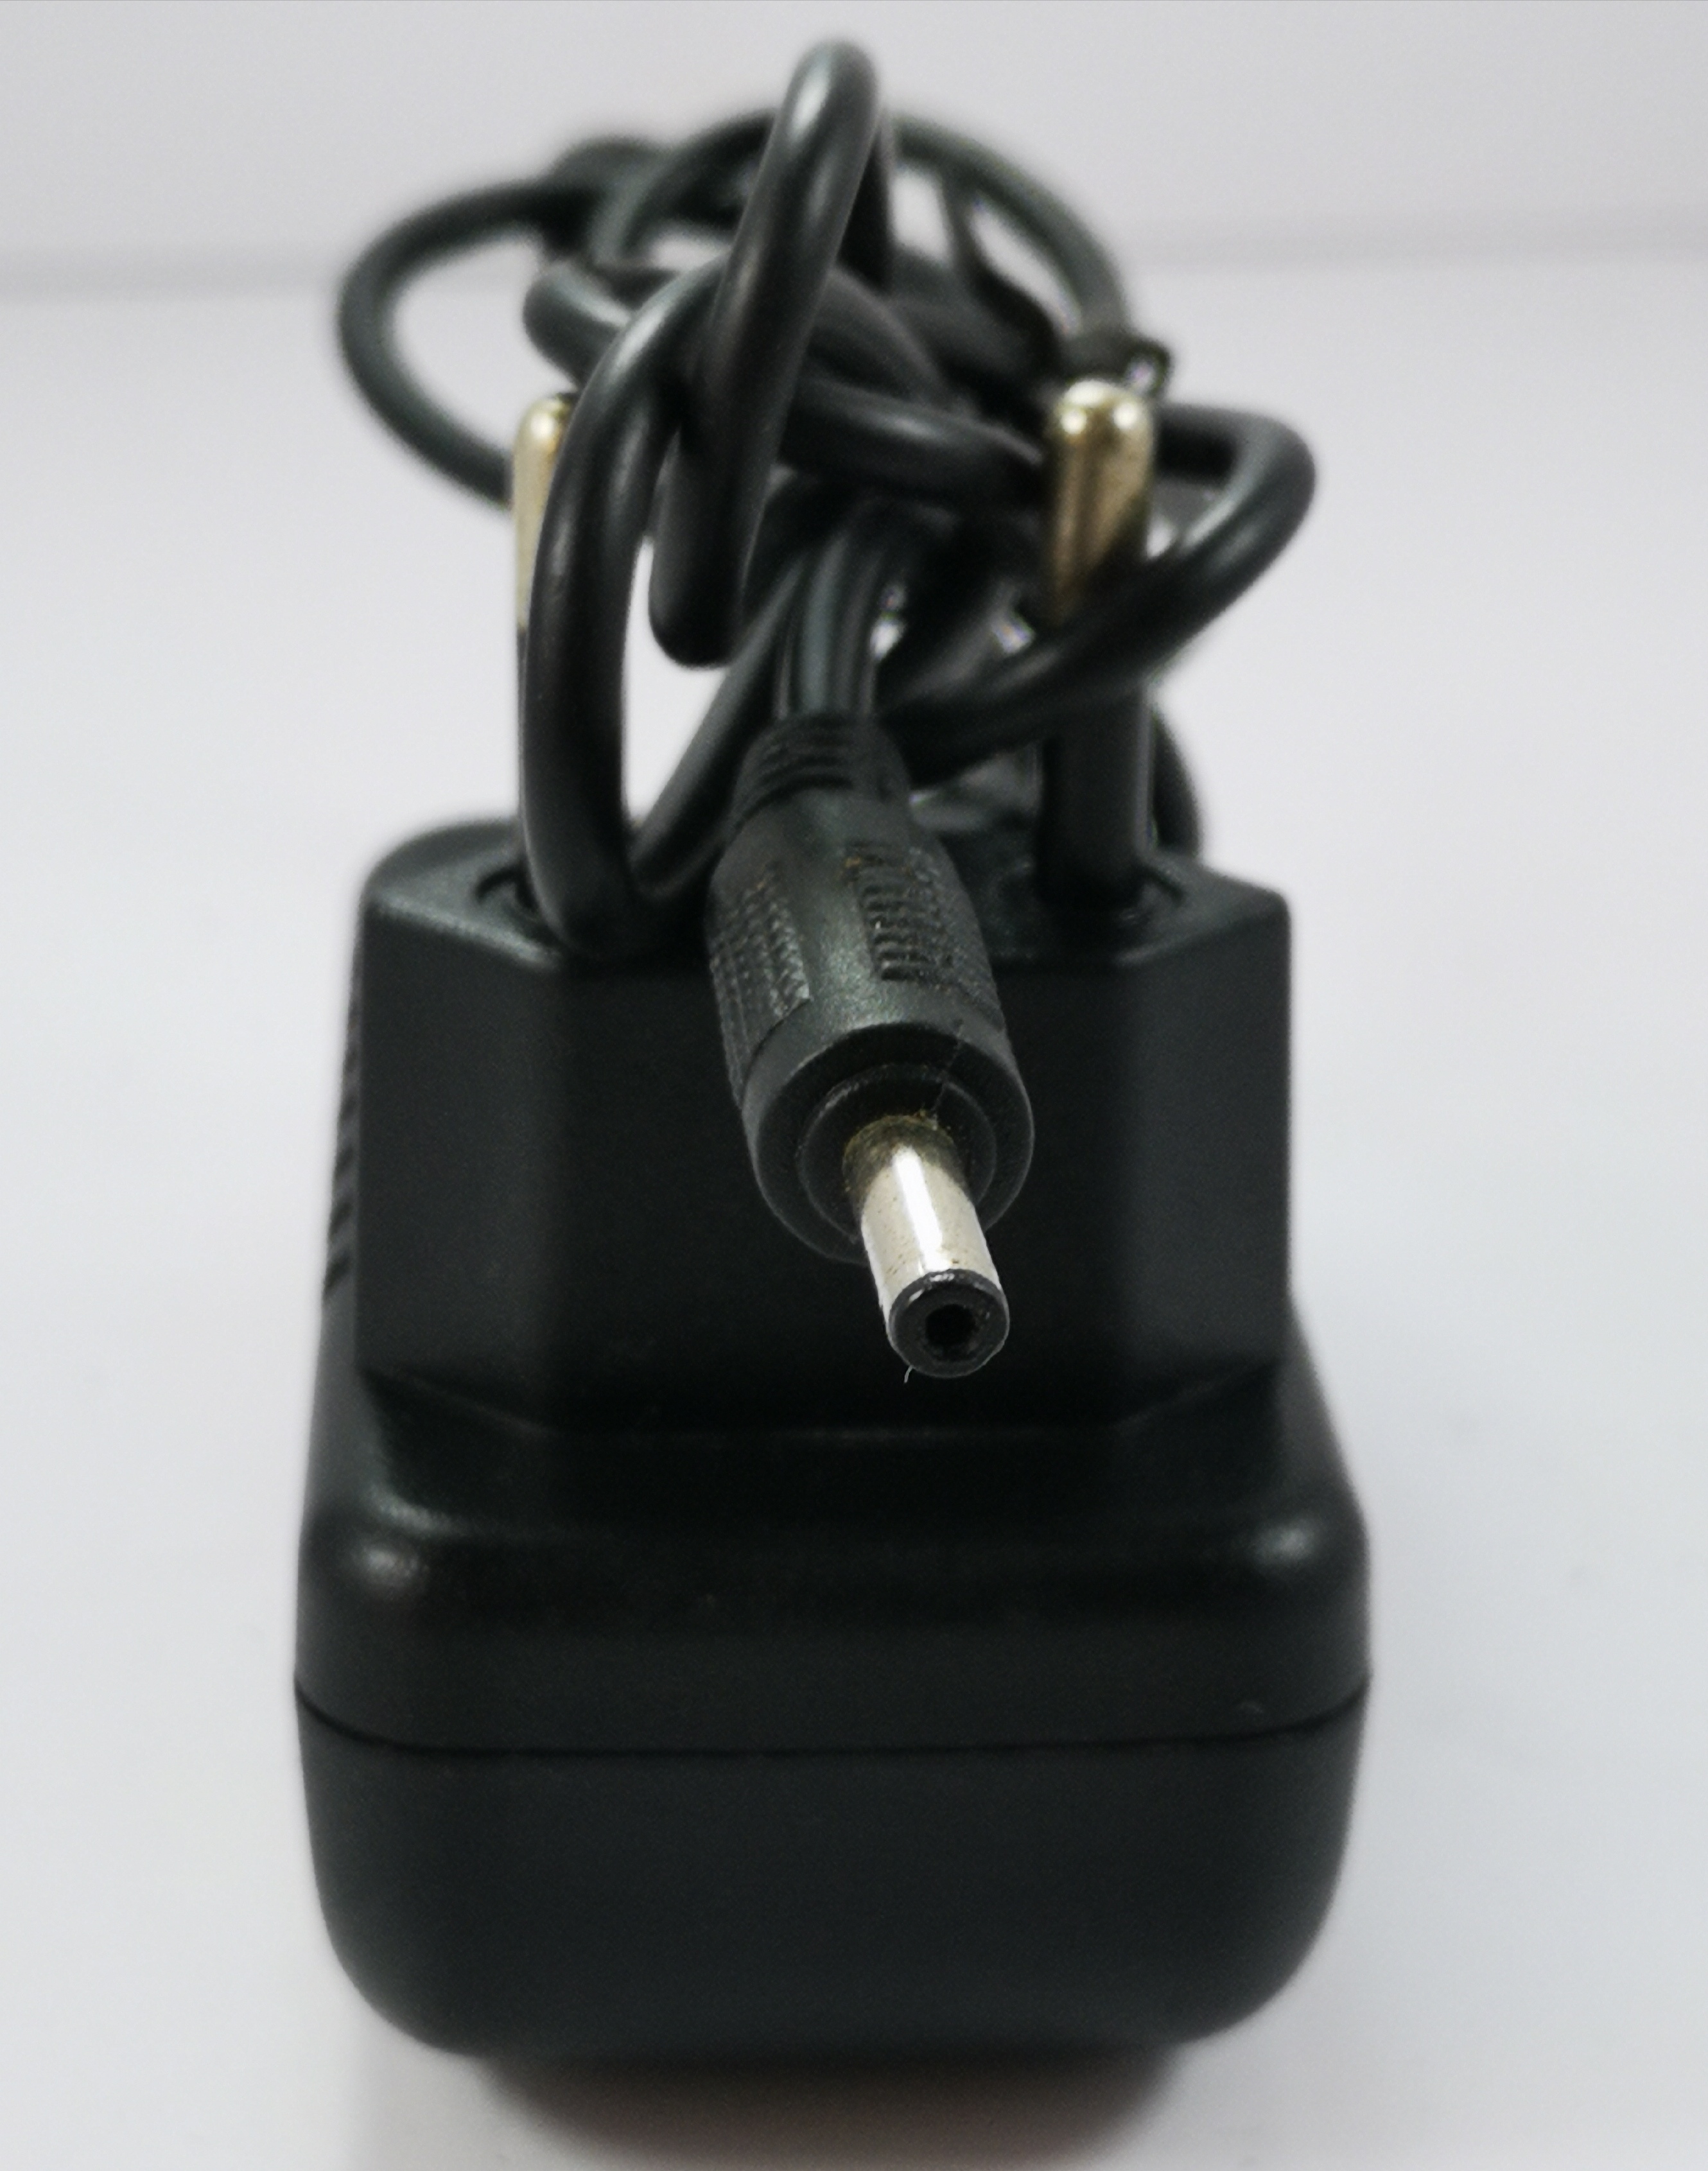 9v charger/1.5A